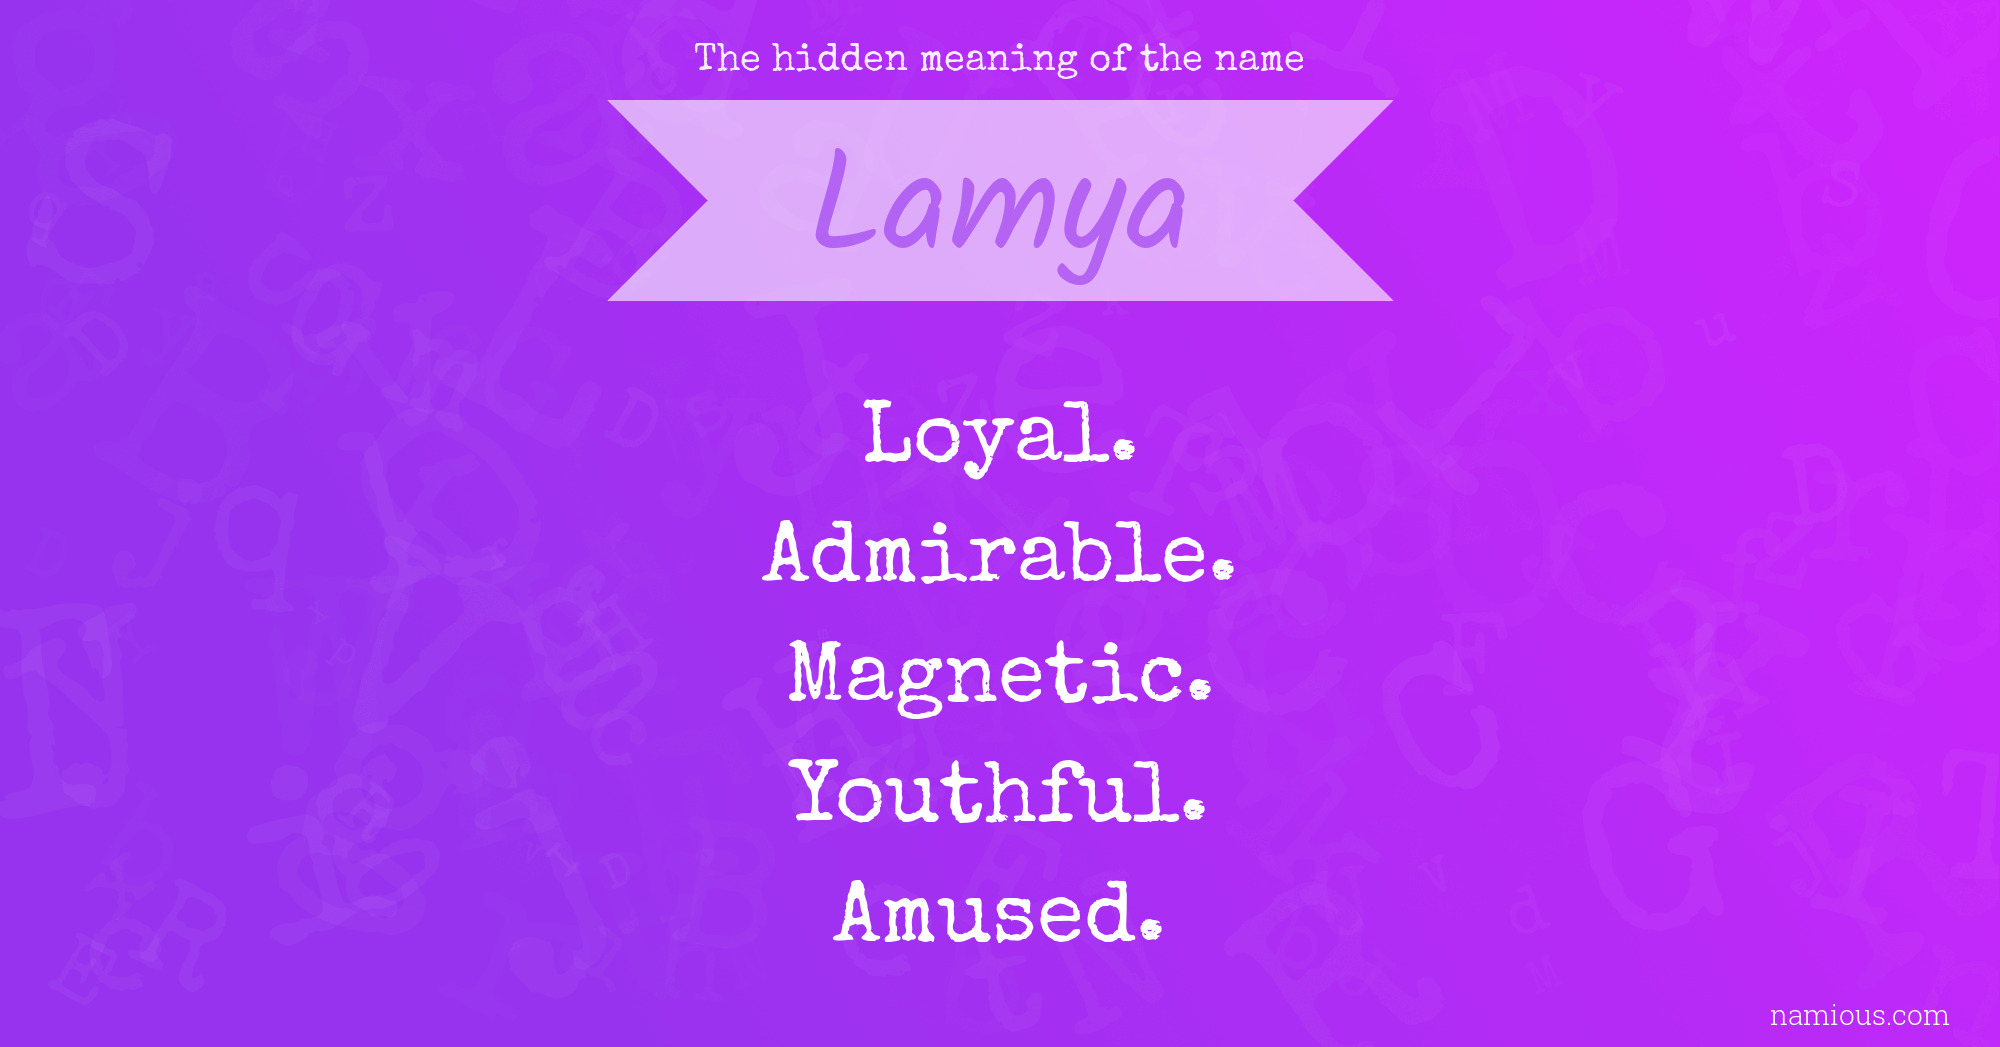 The hidden meaning of the name Lamya